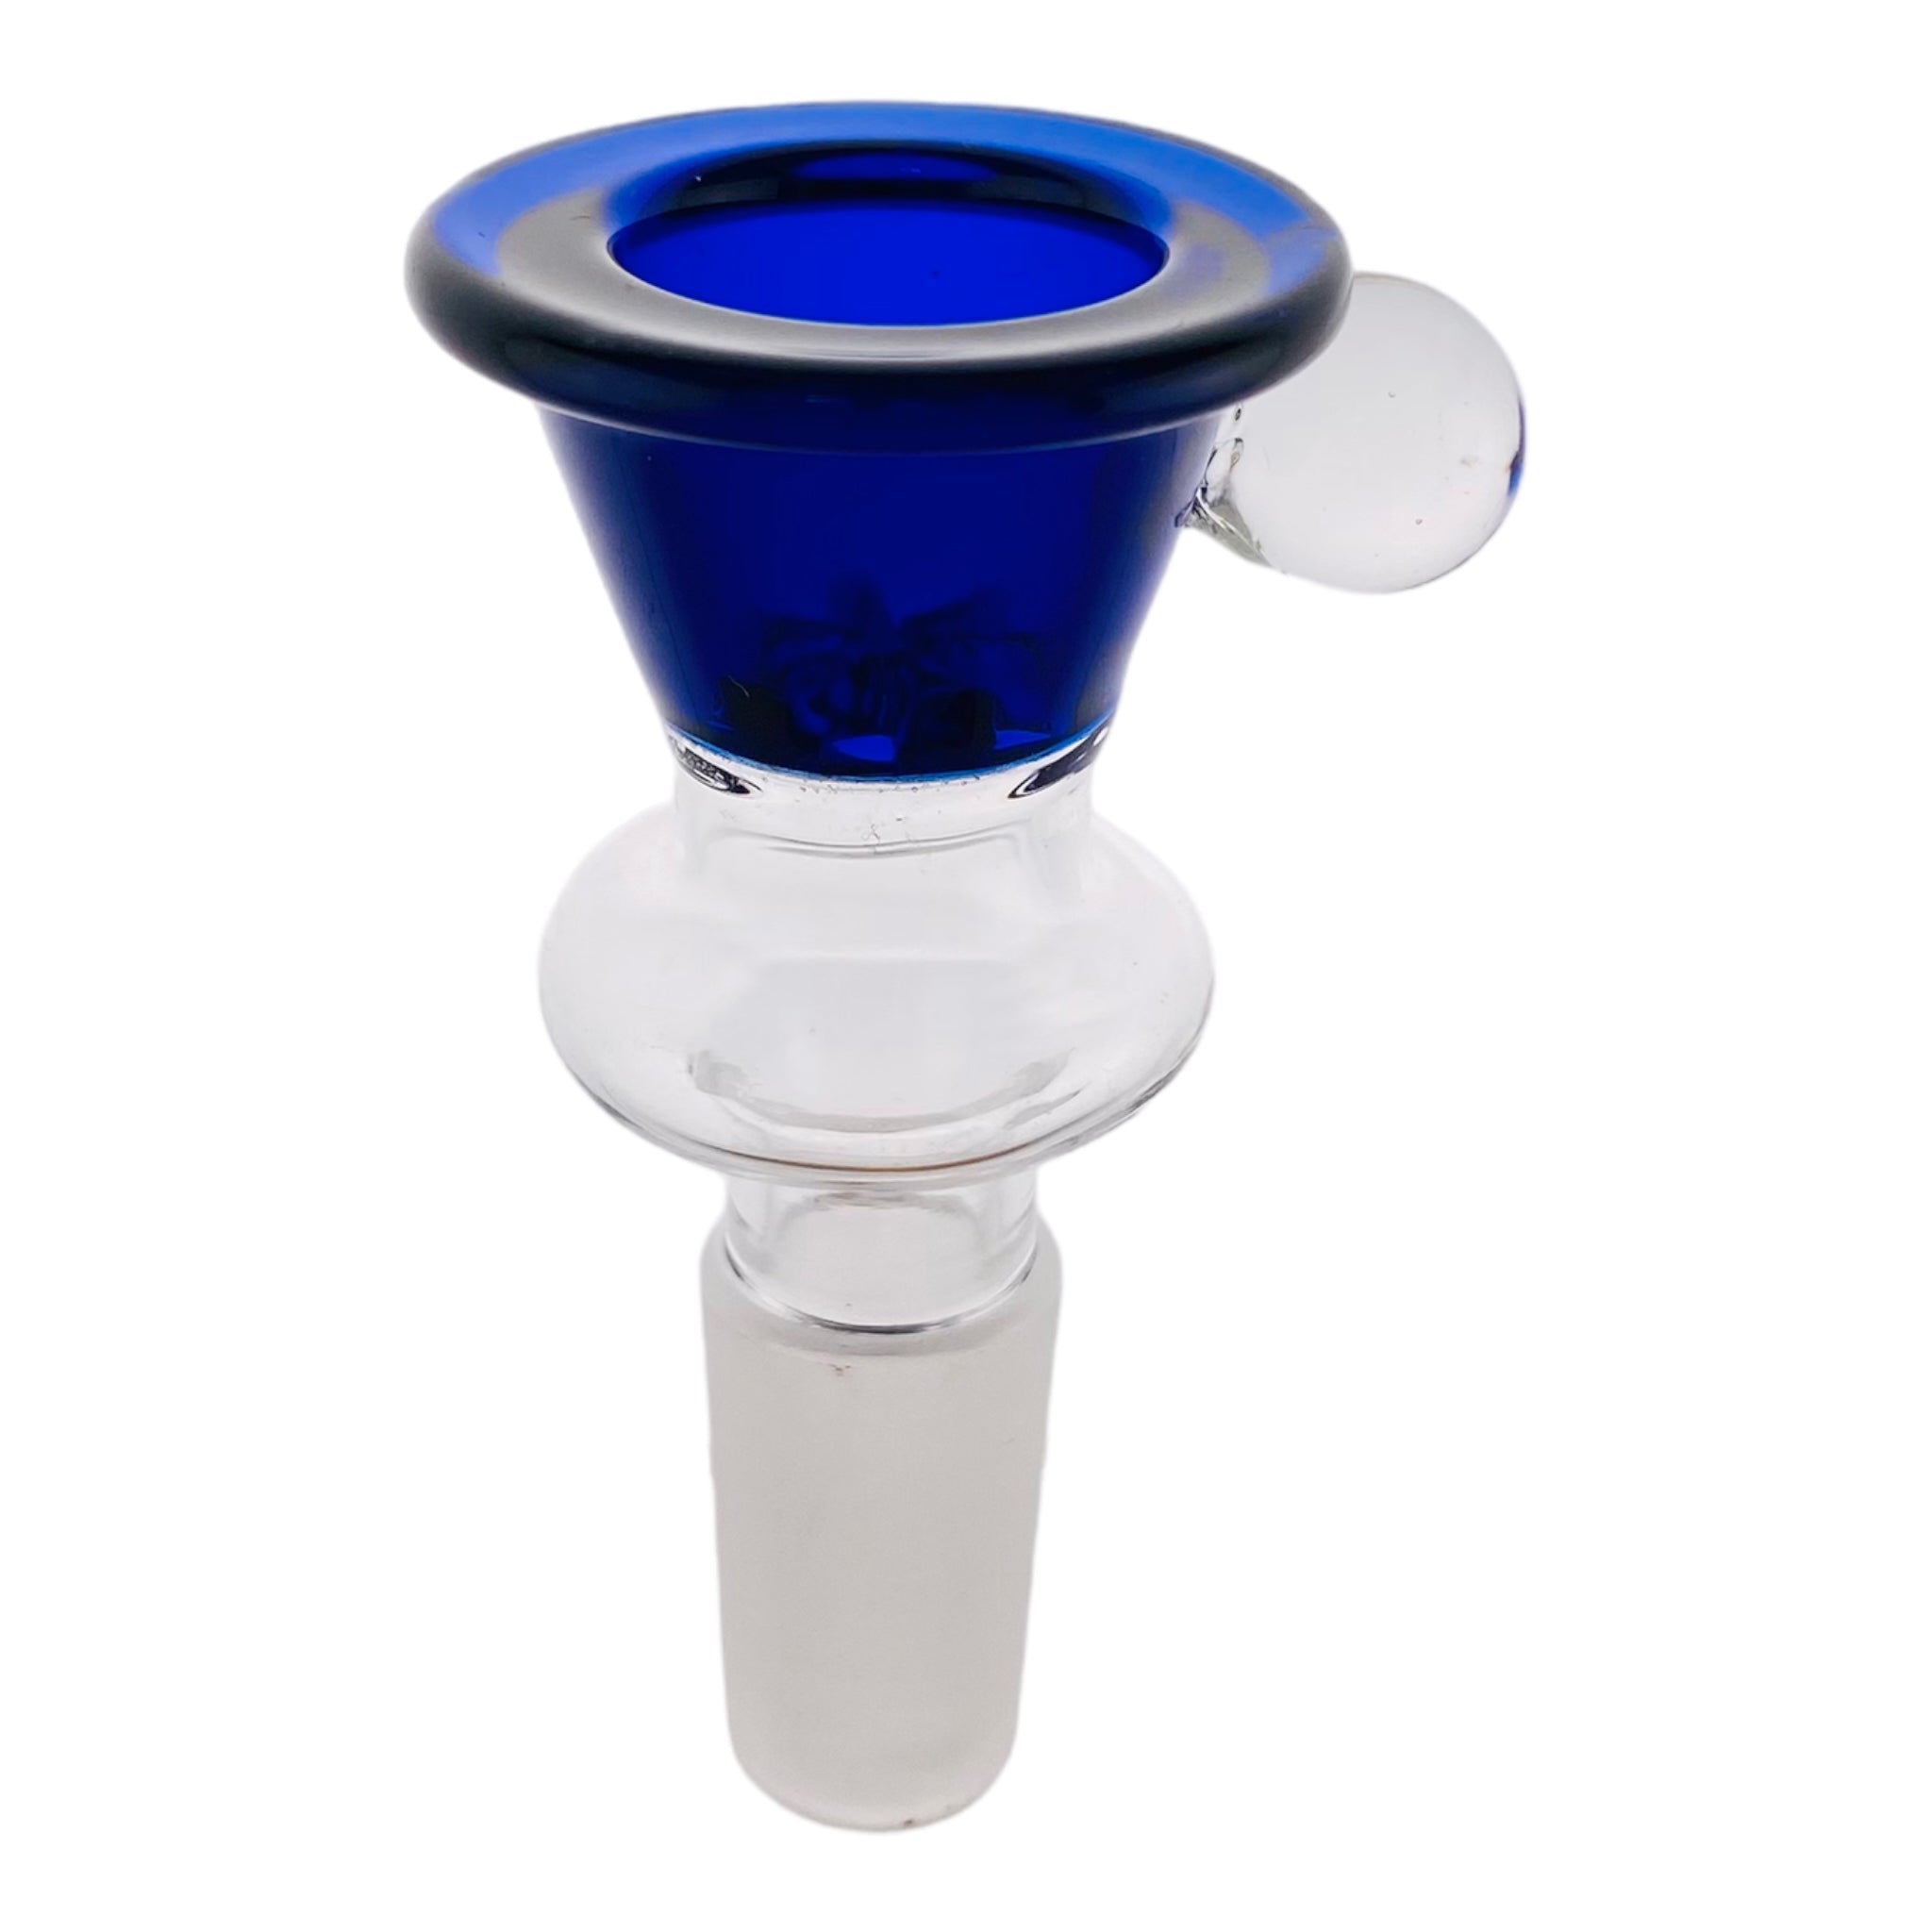 Bong Bowls with built-in Screen - NYVapeShop